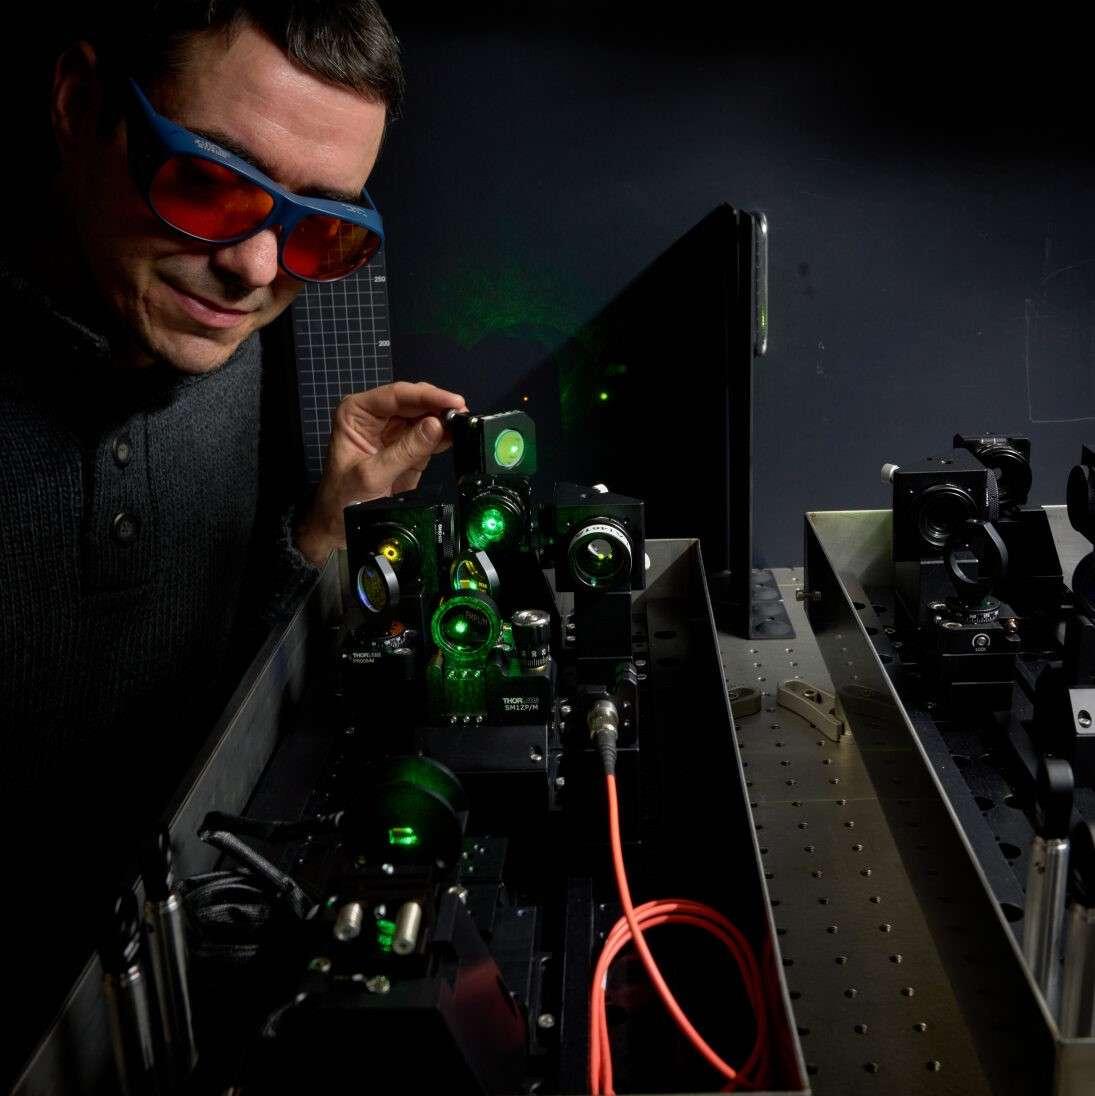 The Single Frequency Laser is a low cost single longitudinal mode efficient laser for use in spectroscopy, optical metrology communications amongst others